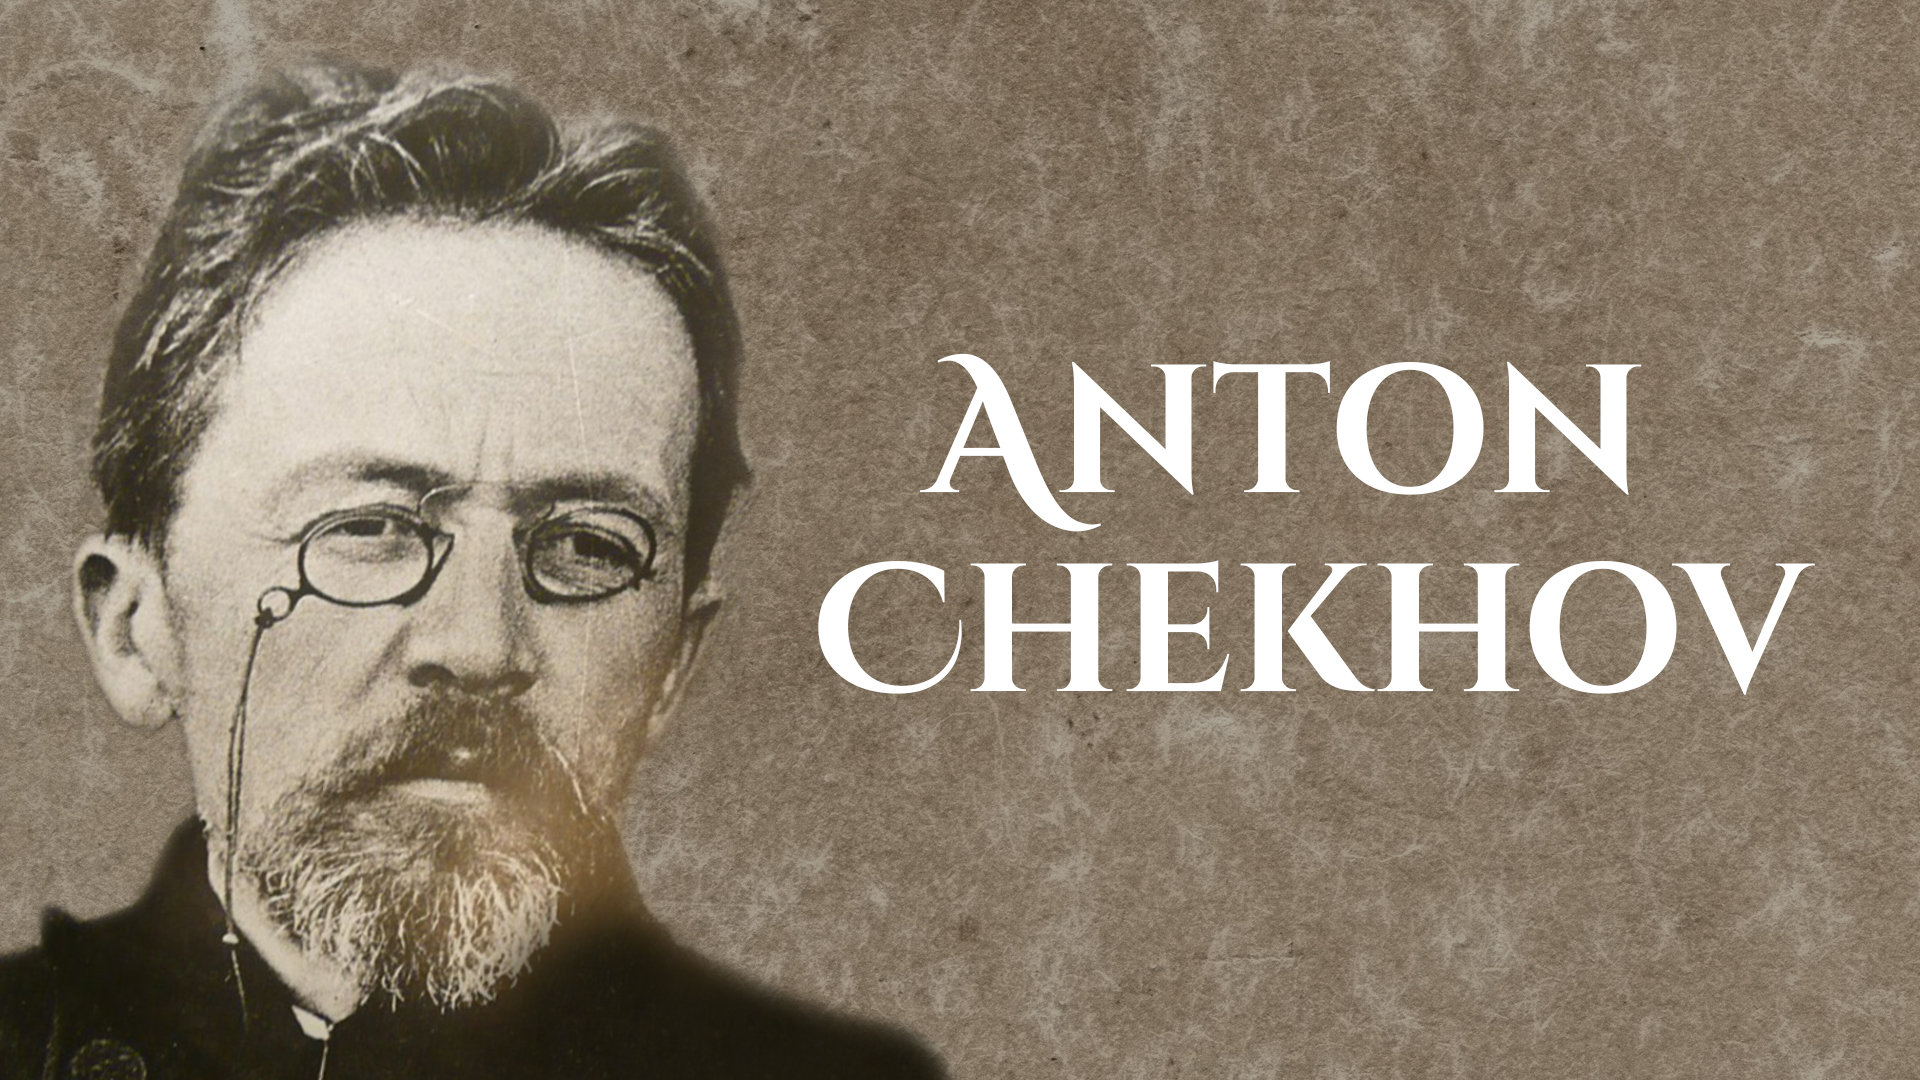 ANTON CHEKHOV Watercolor and Ink Portrait POSTER Various - Etsy